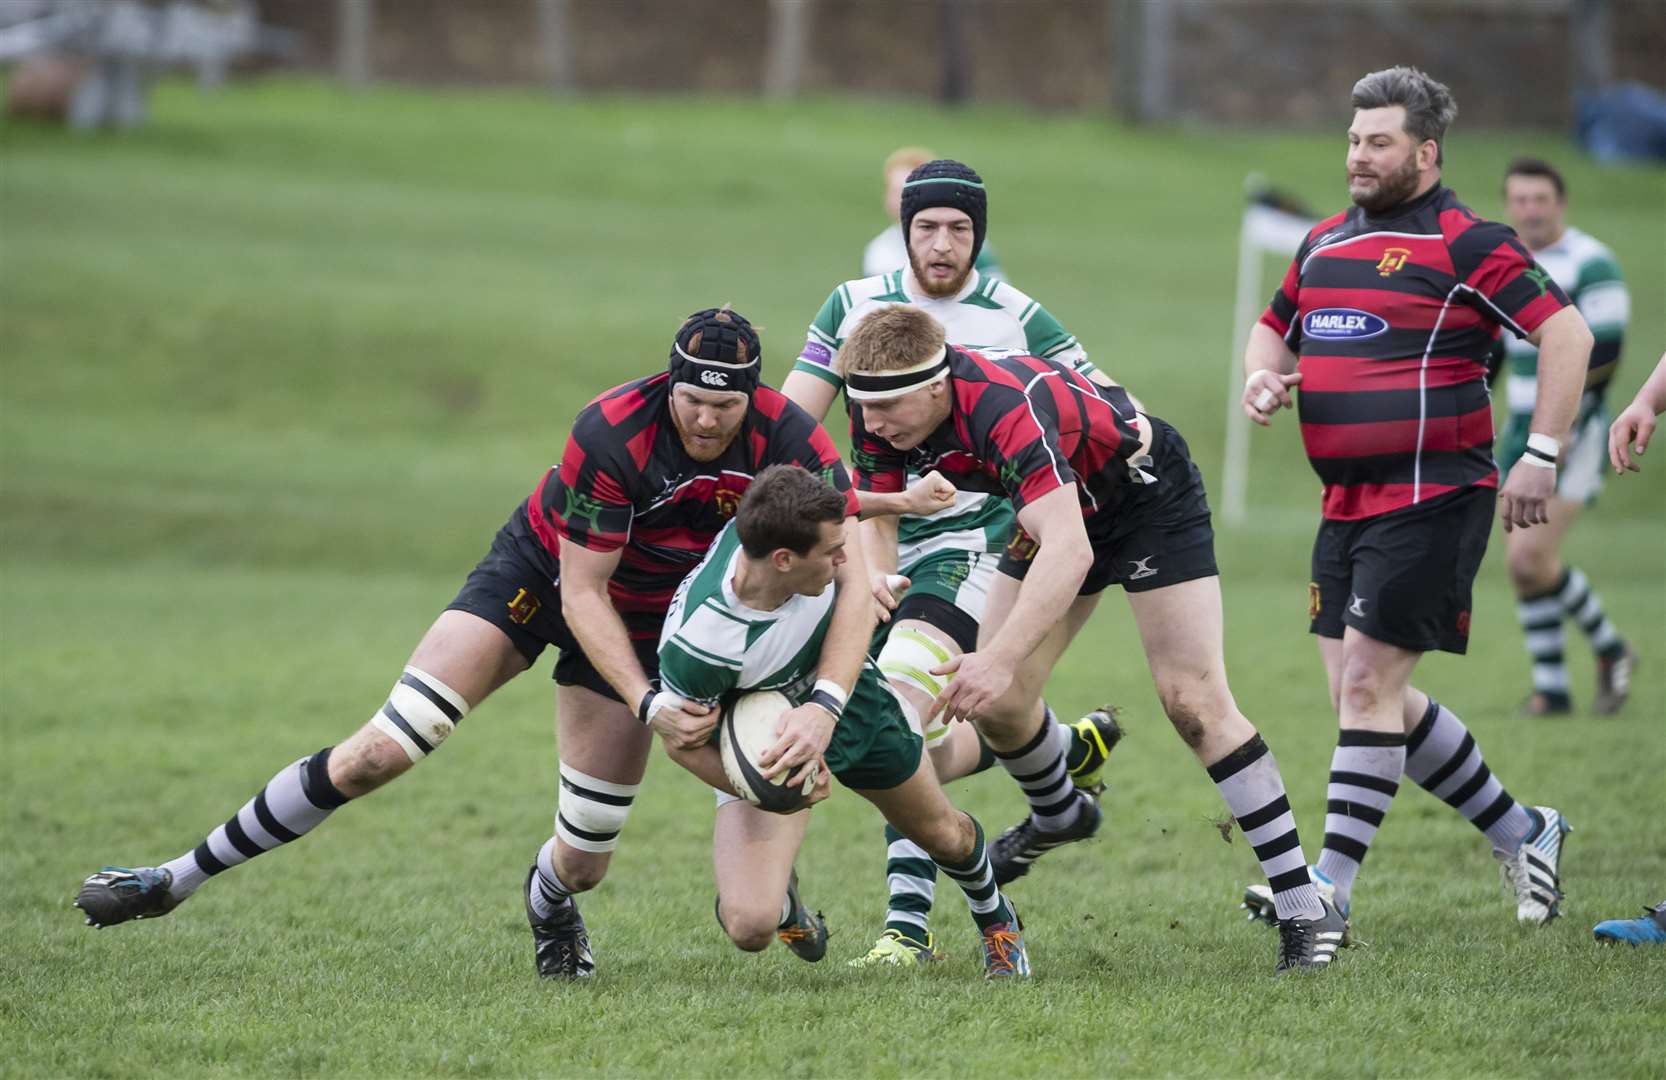 Rugby clubs and local schools say tackling is a key part of the game.